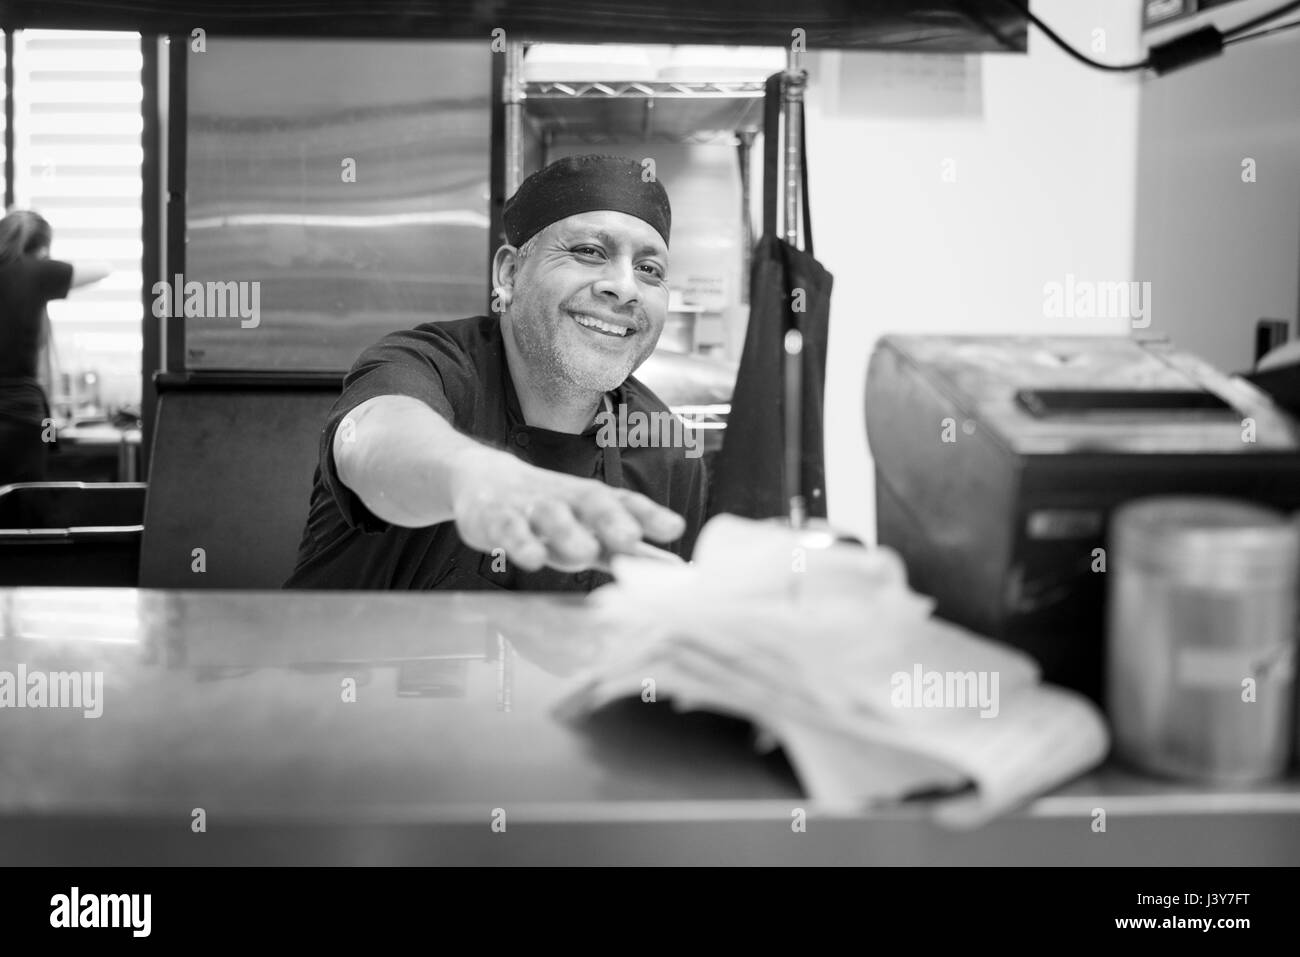 Chef in commercial kitchen smiling at camera Stock Photo